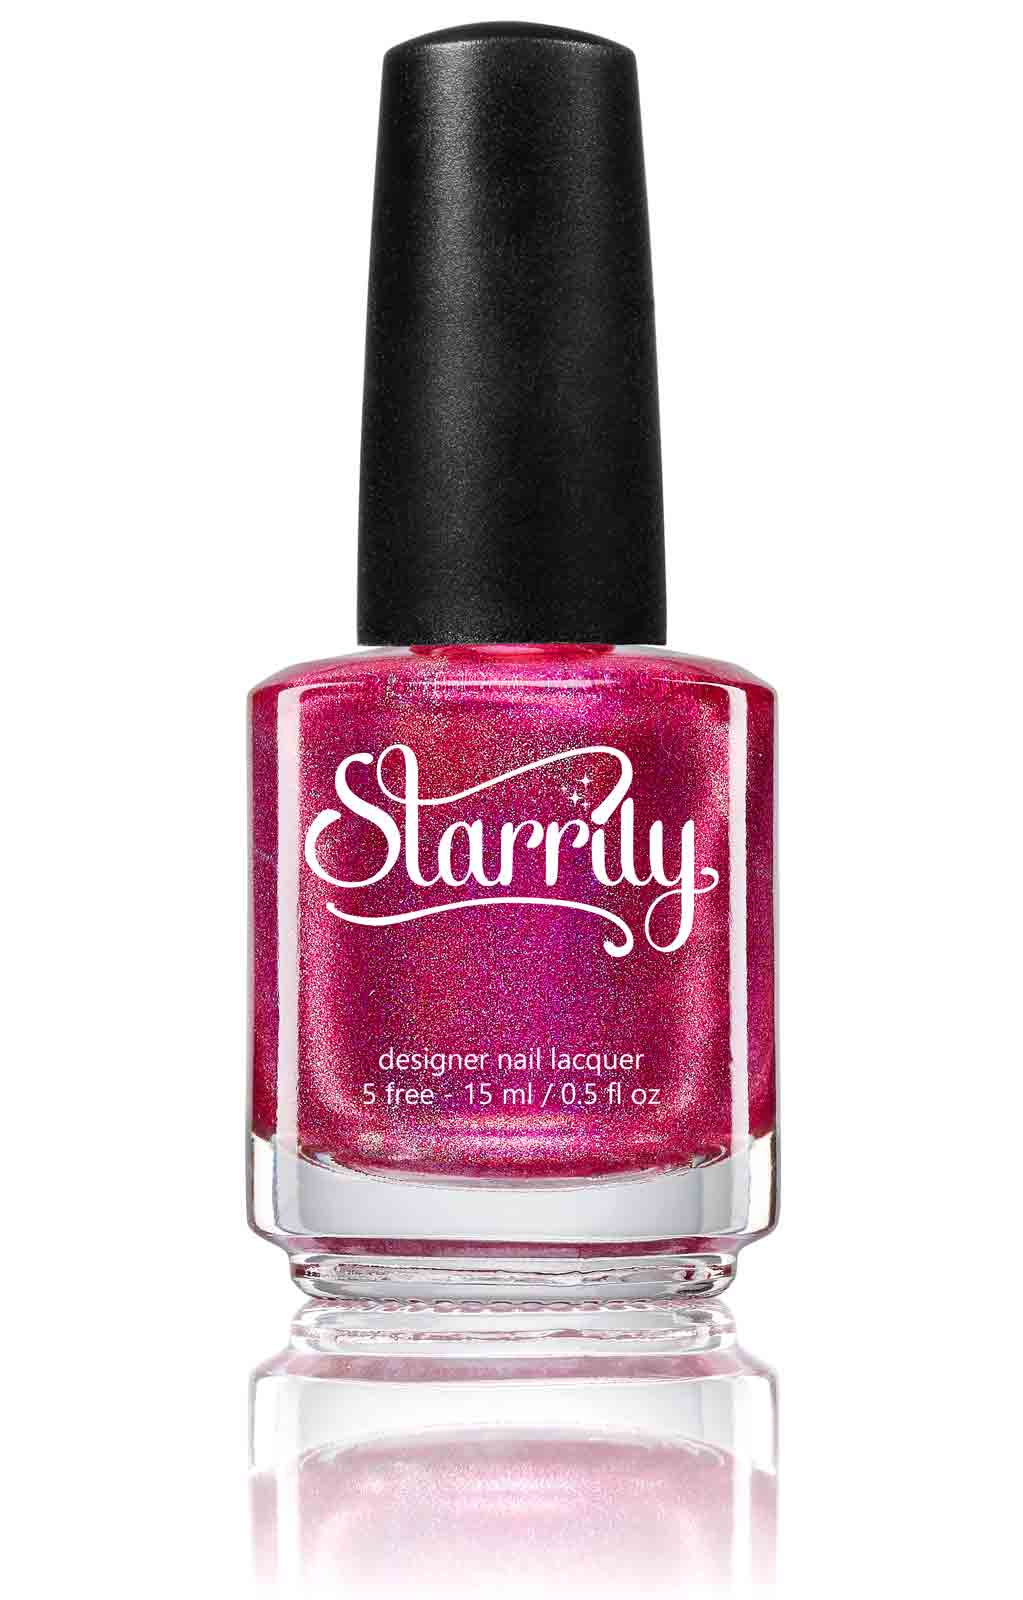 Gamma Ray is a beautiful pink linear holographic nail polish